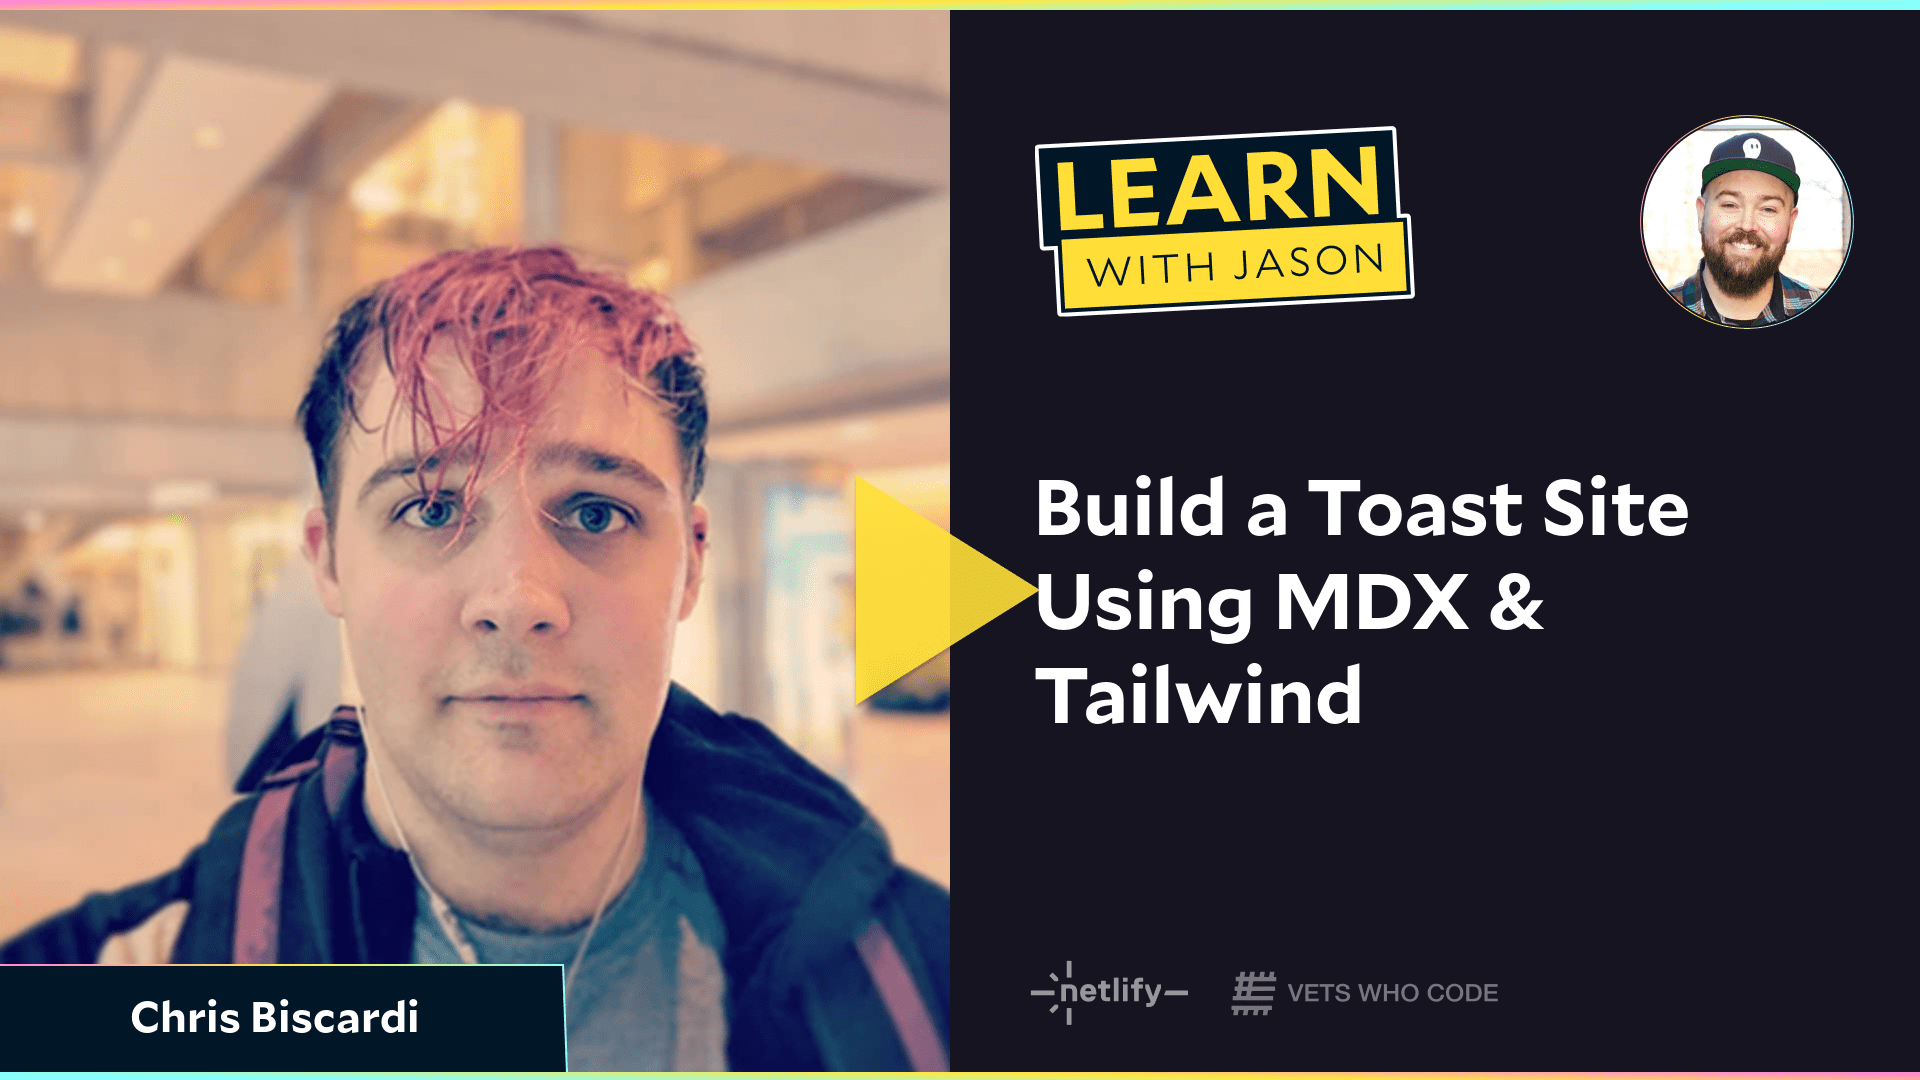 Build a Toast Site Using MDX & Tailwind (with Chris Biscardi)